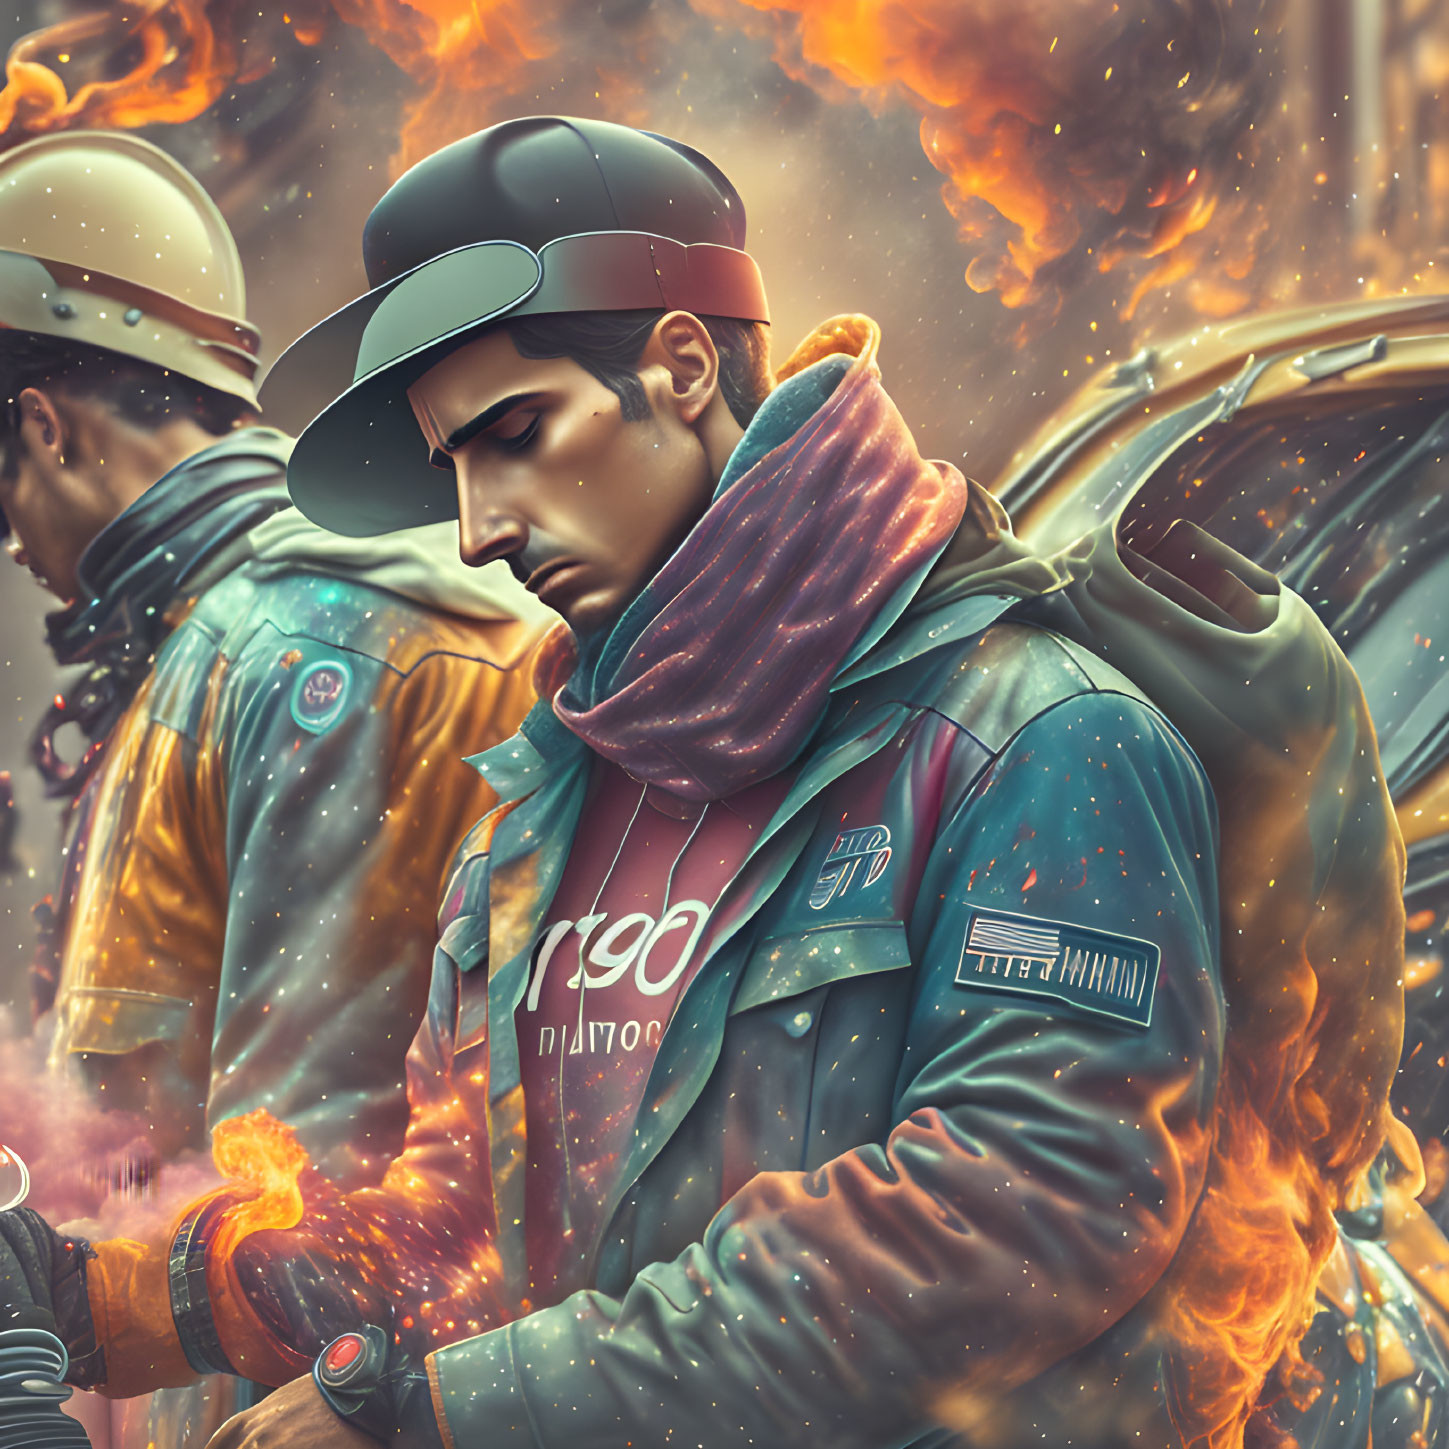 Digital illustration of a man in hat and jacket by burning car